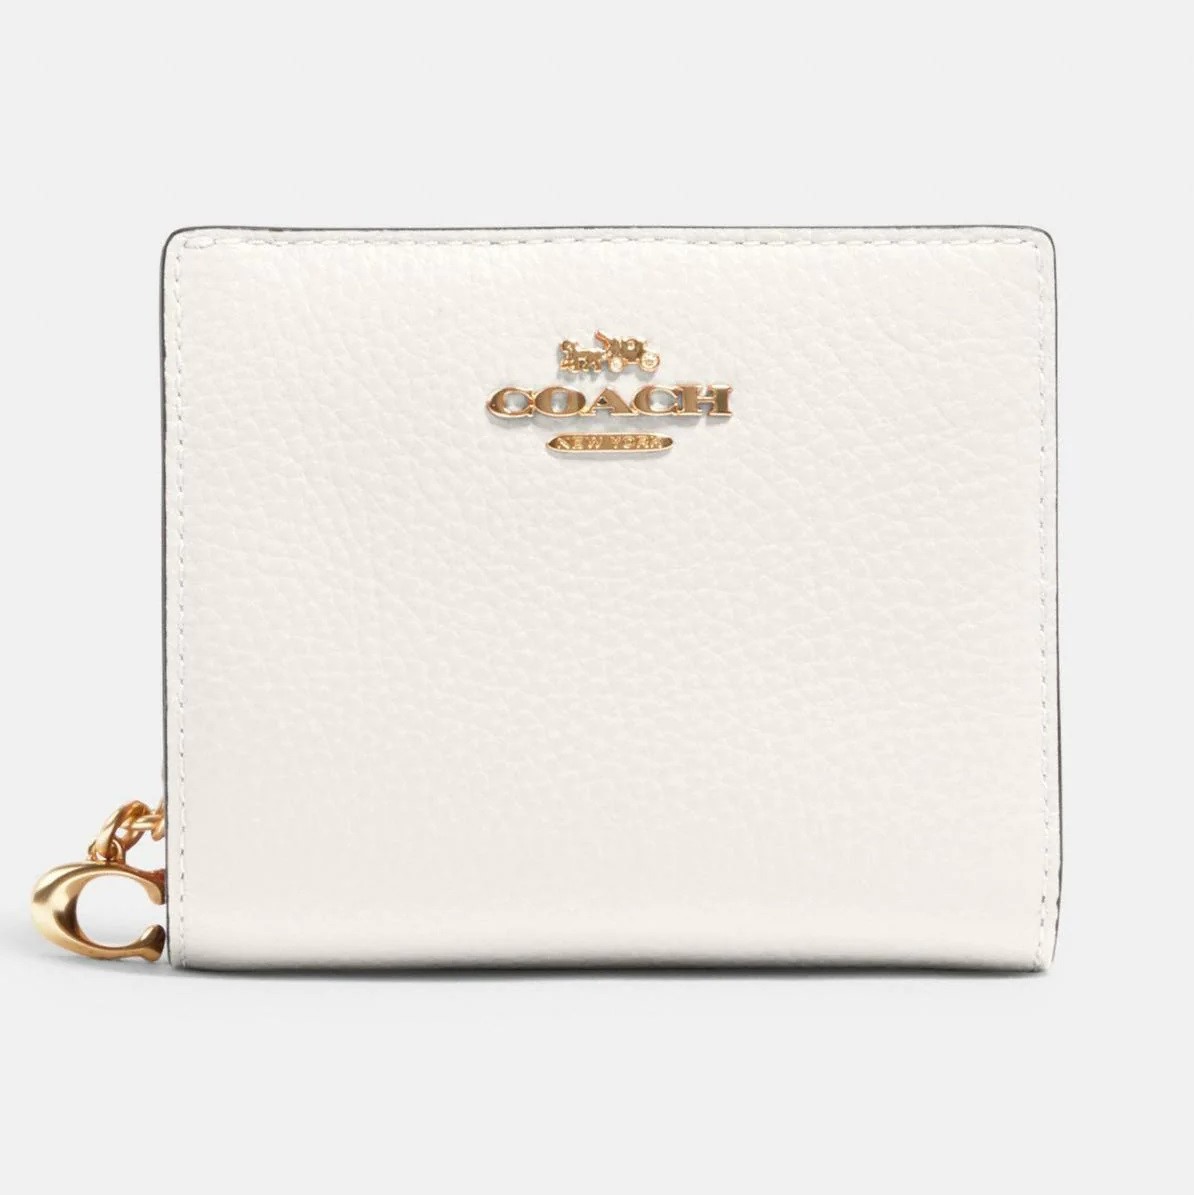 VÍ NGẮN COACH SMALL WALLET PEBBLE LEATHER SNAP WALLET 22